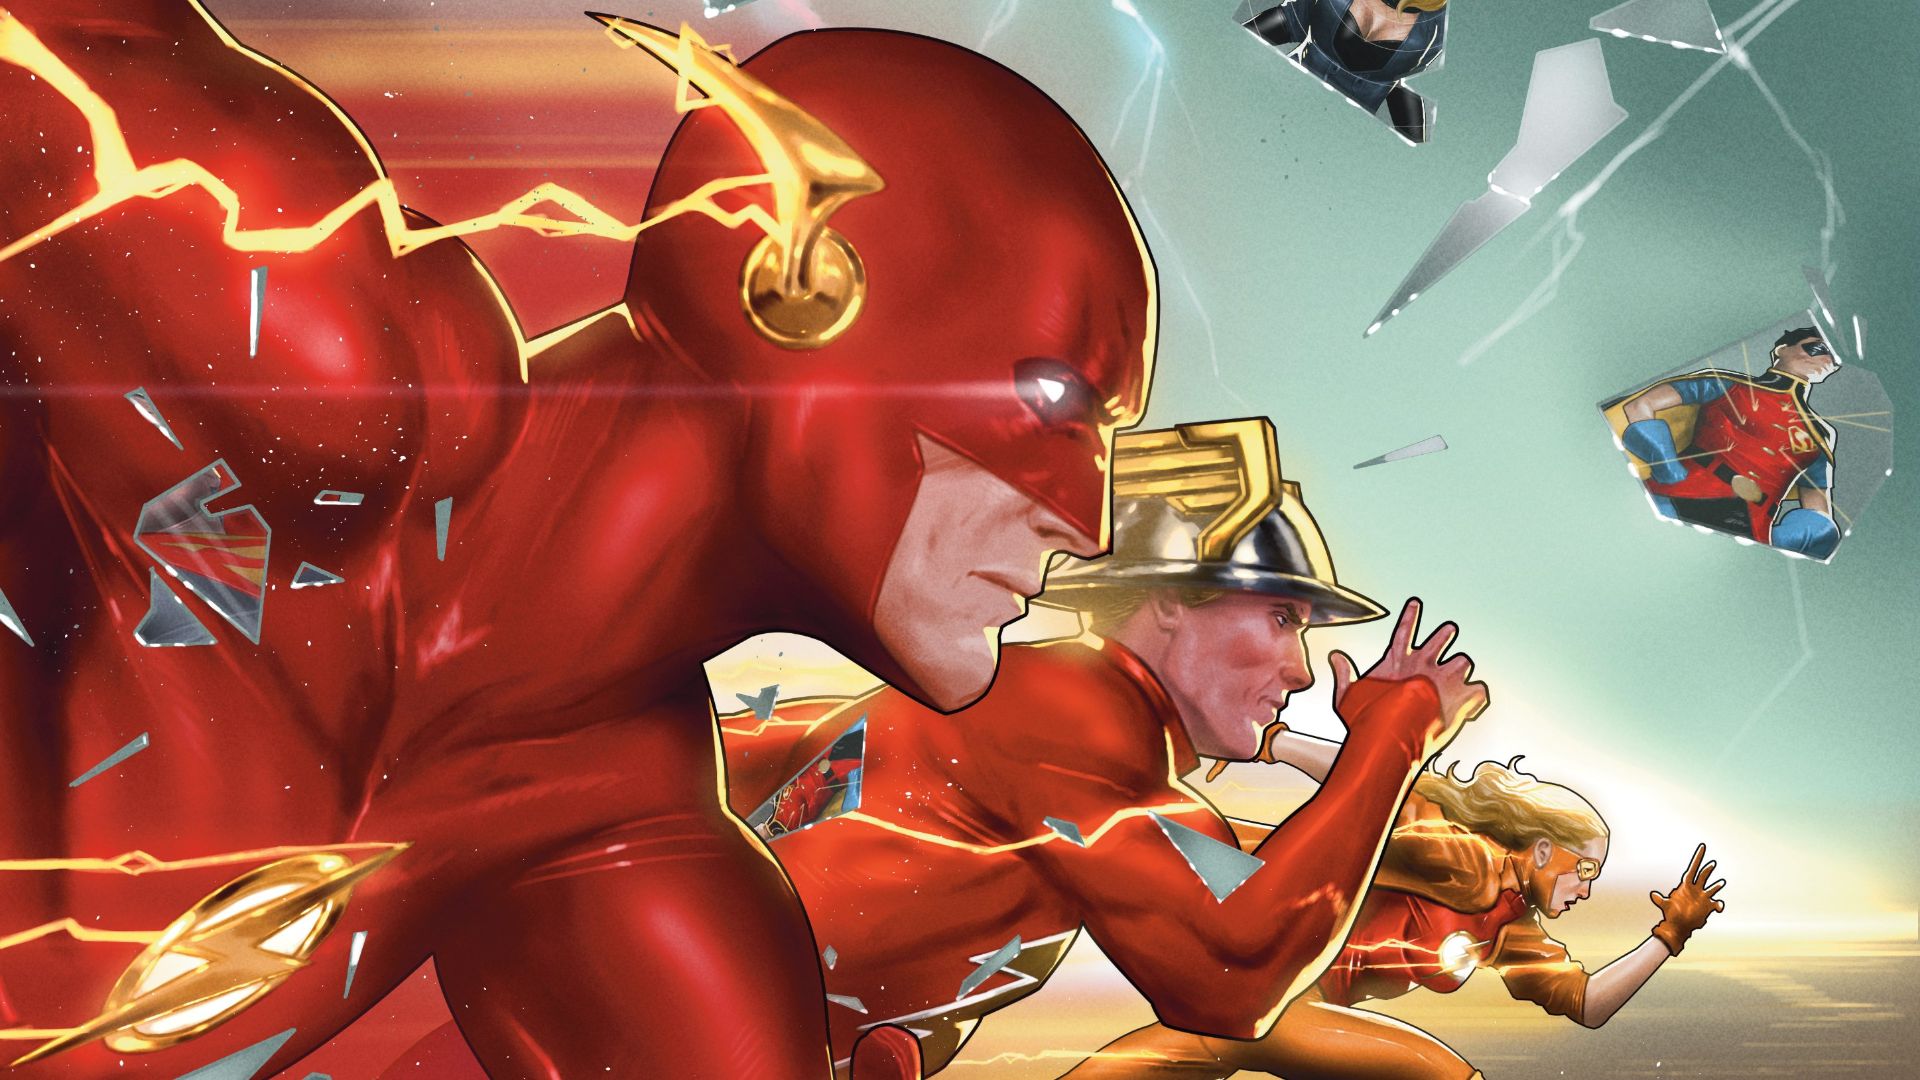 August’s Flash #785 might hold the key to Dark Crisis